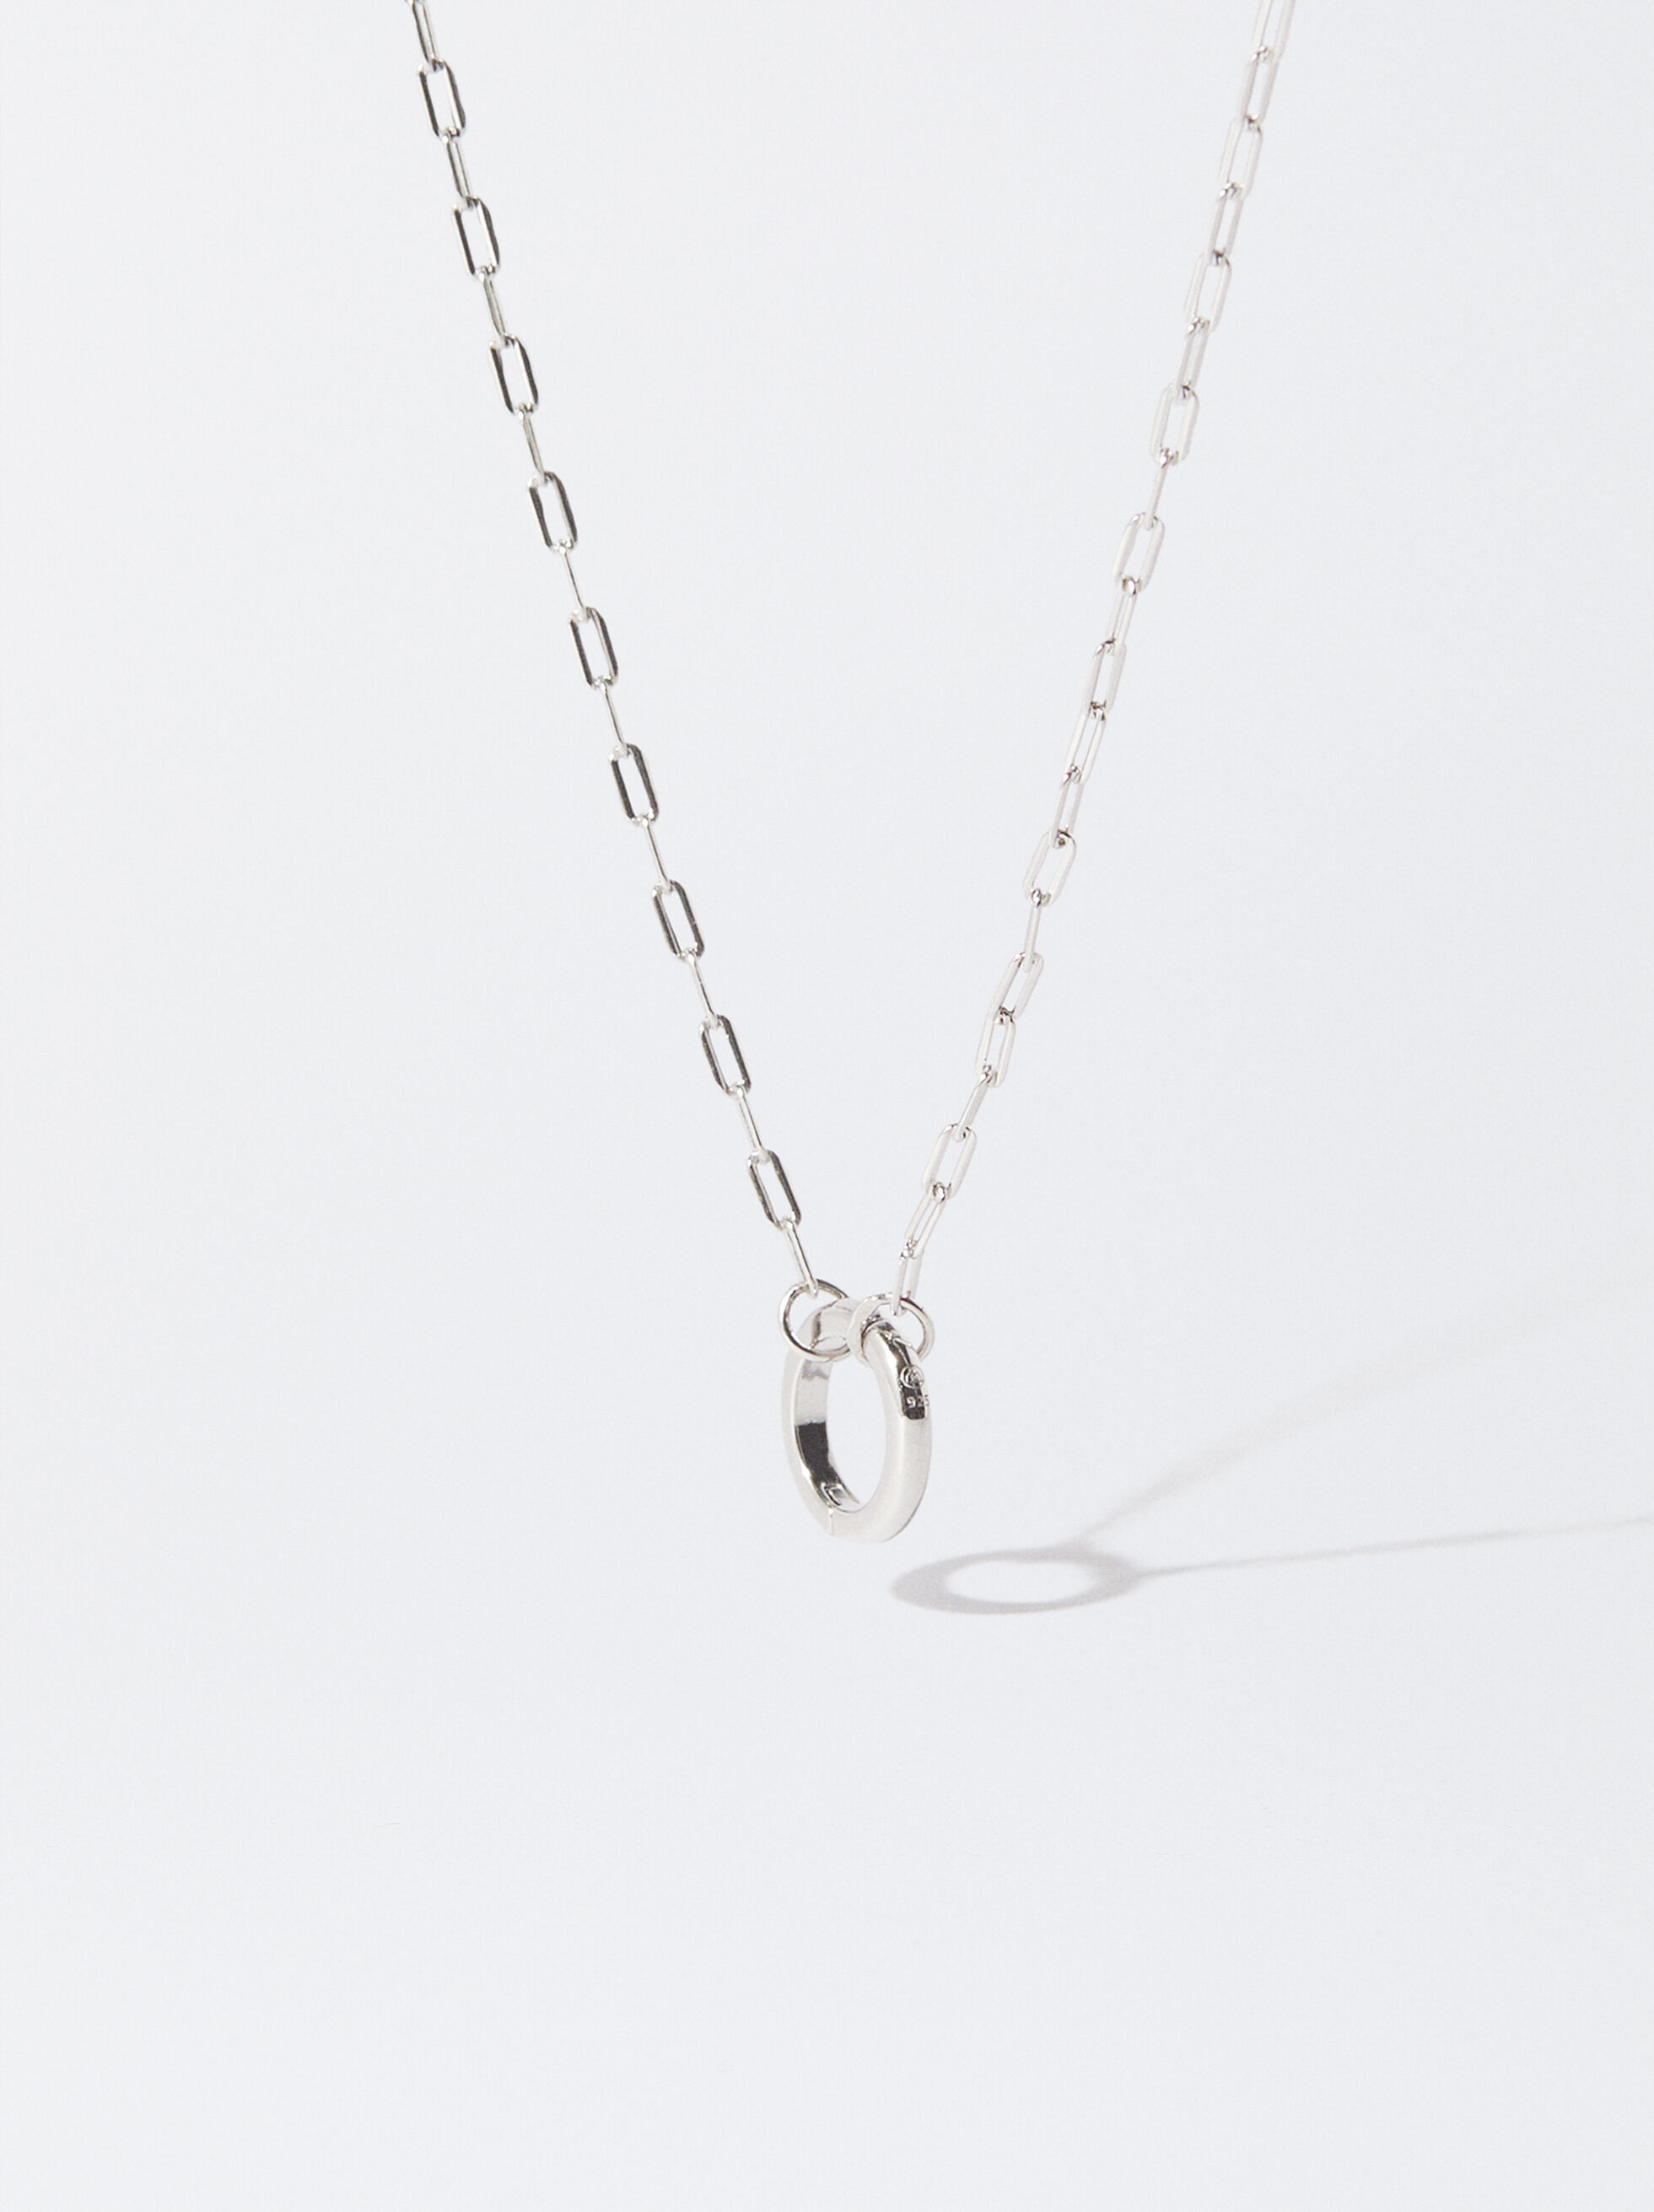 Interlocking circles necklace - Stronger together - Unbreakable love - Gina  Kim Jewellery